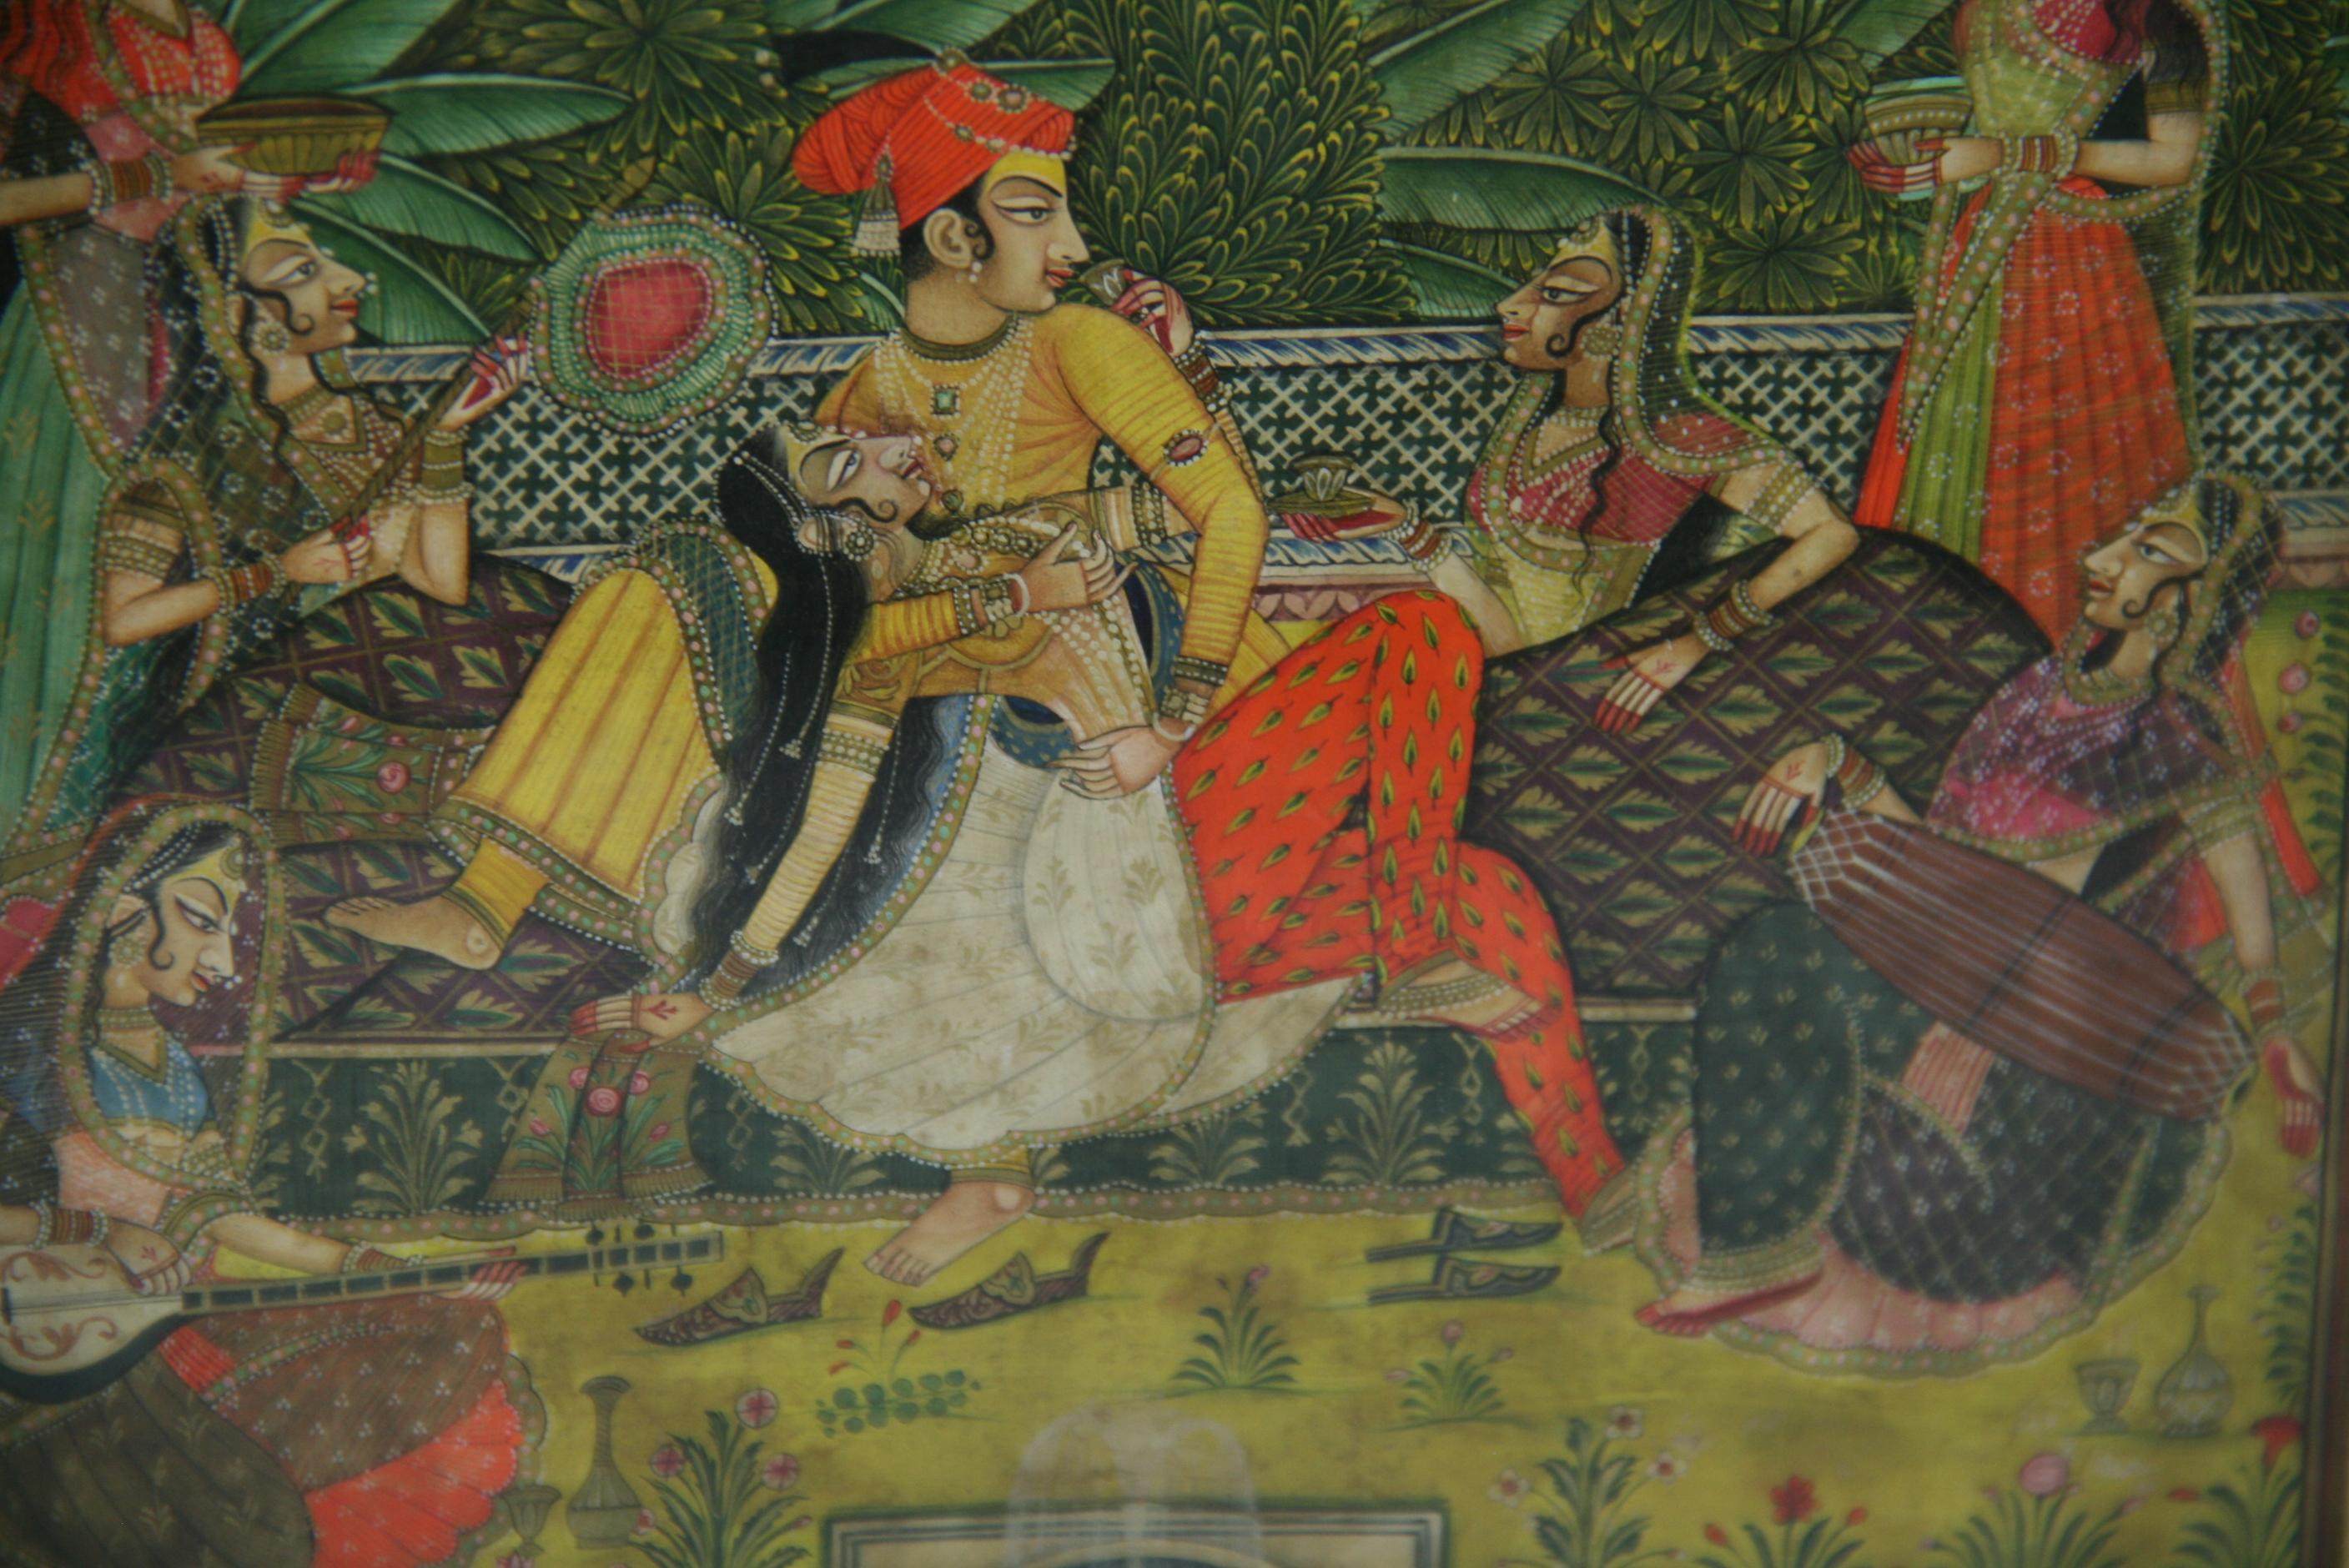 3935 Antique gouache Indian painting on paper
Image size 9x6